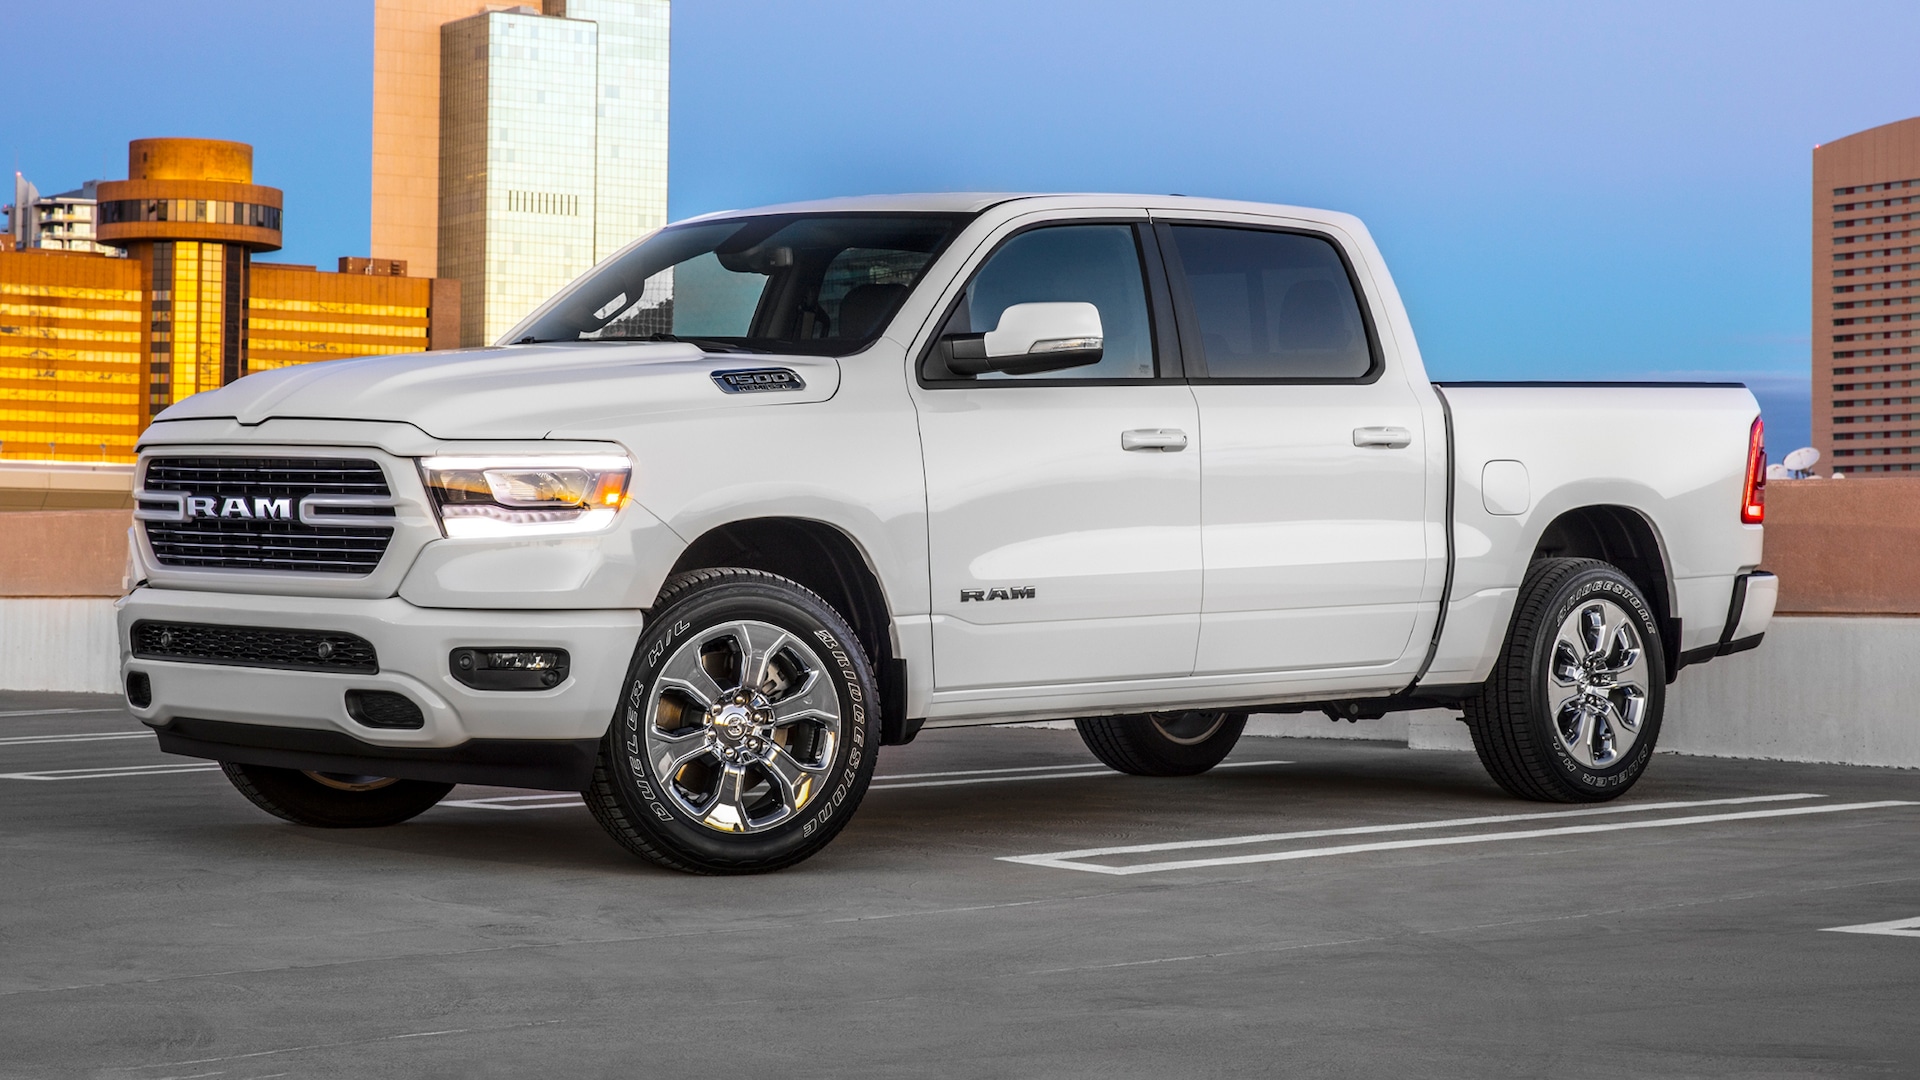 2020 Ram 1500 Prices, Reviews, and Photos - MotorTrend